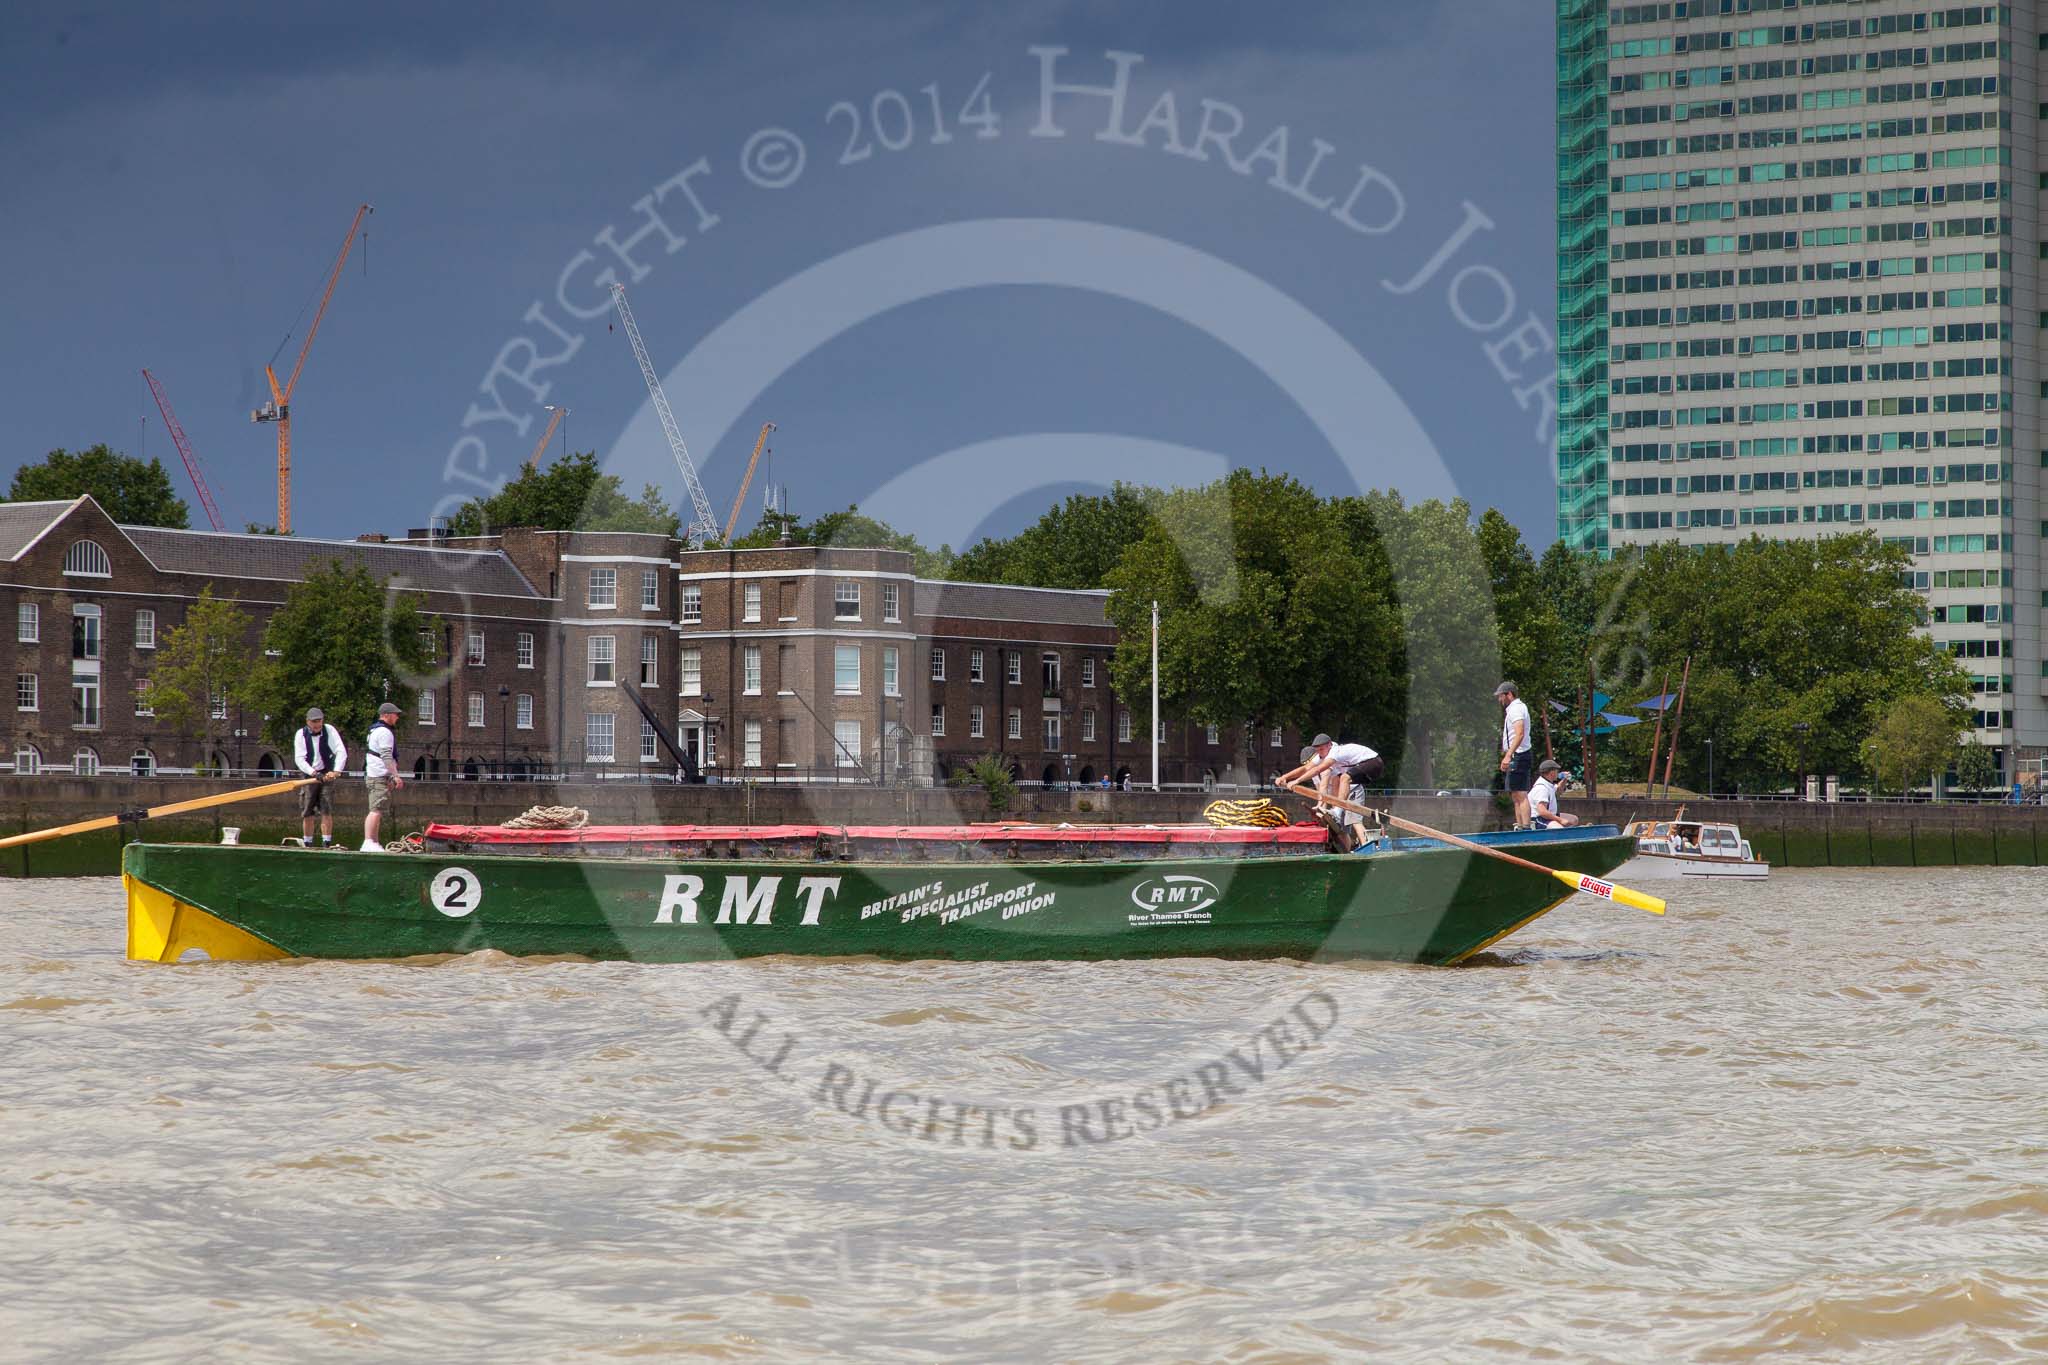 TOW River Thames Barge Driving Race 2014.
River Thames between Greenwich and Westminster,
London,

United Kingdom,
on 28 June 2014 at 12:34, image #92